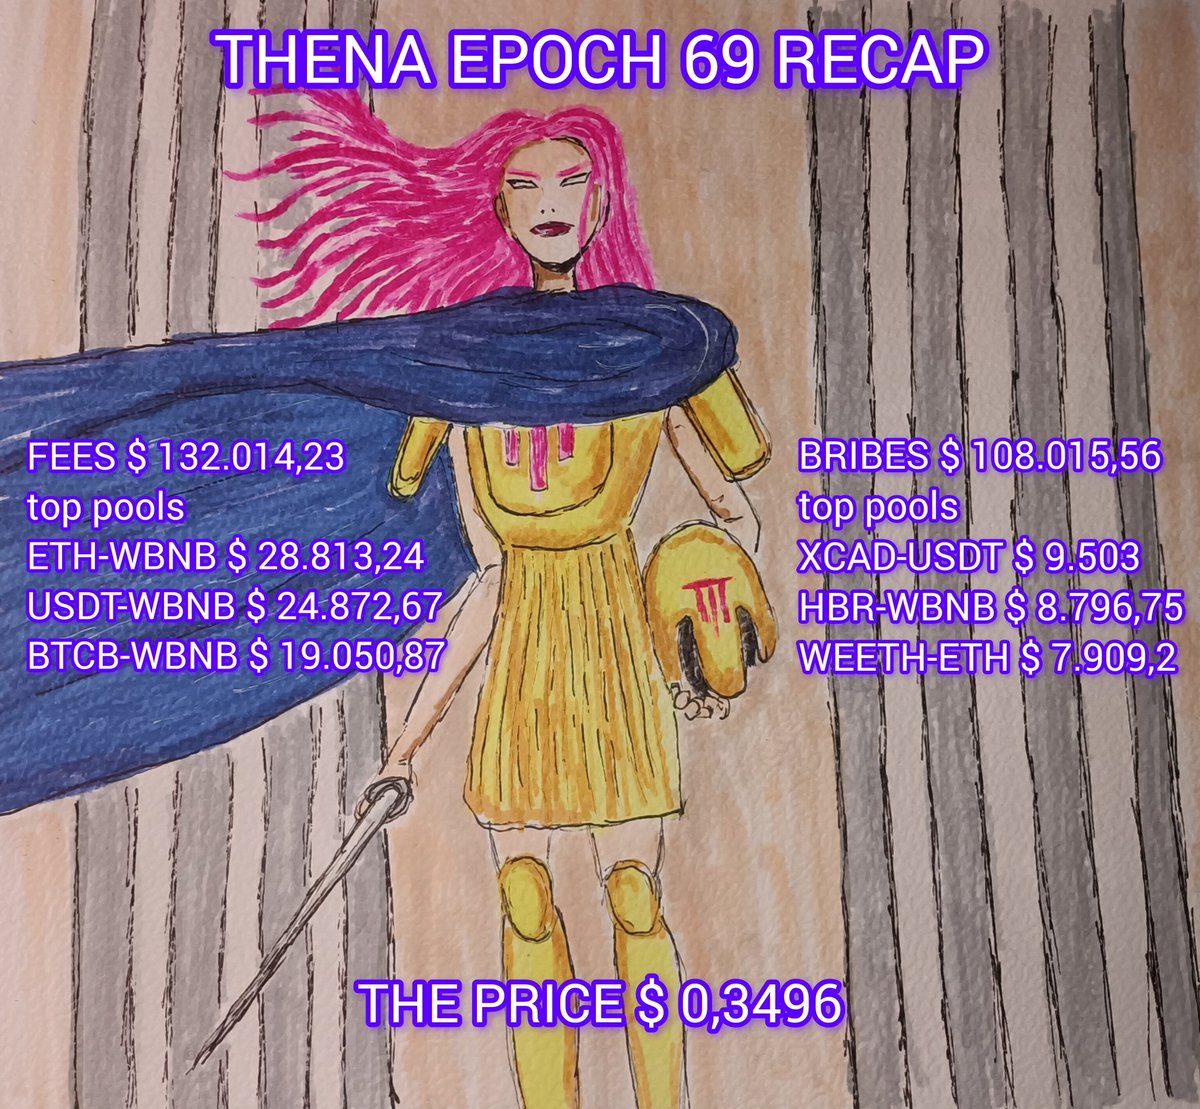 Epoch 69 @ThenaFi_ recap! 240k fees + bribes!

As always @XcademyOfficial is top briboor!
@0xHarborMarket in second place and to close the podium @EtherFi

THENA generared more than 18 M in revenue! total fees & bribes are both over 9 M 

life as vethe lockers is beautiful